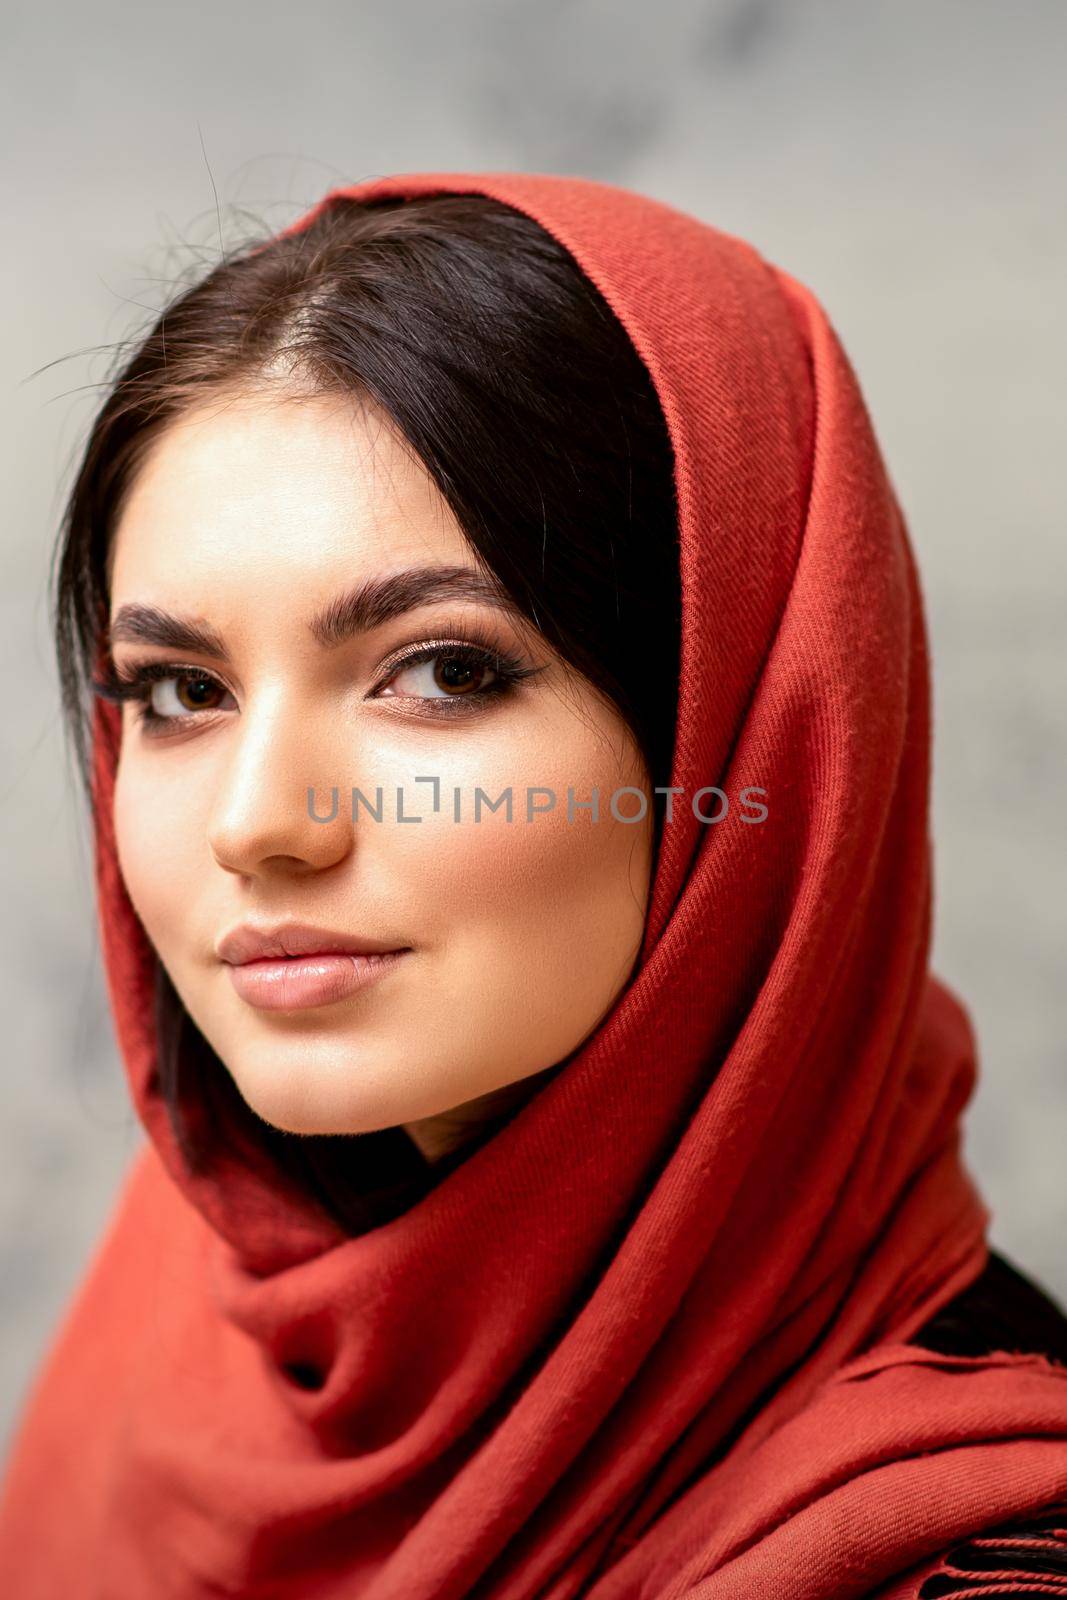 The fashionable young woman. Portrait of the beautiful female model with long hair and makeup in a red scarf. Beauty young caucasian woman on the background of a gray wall